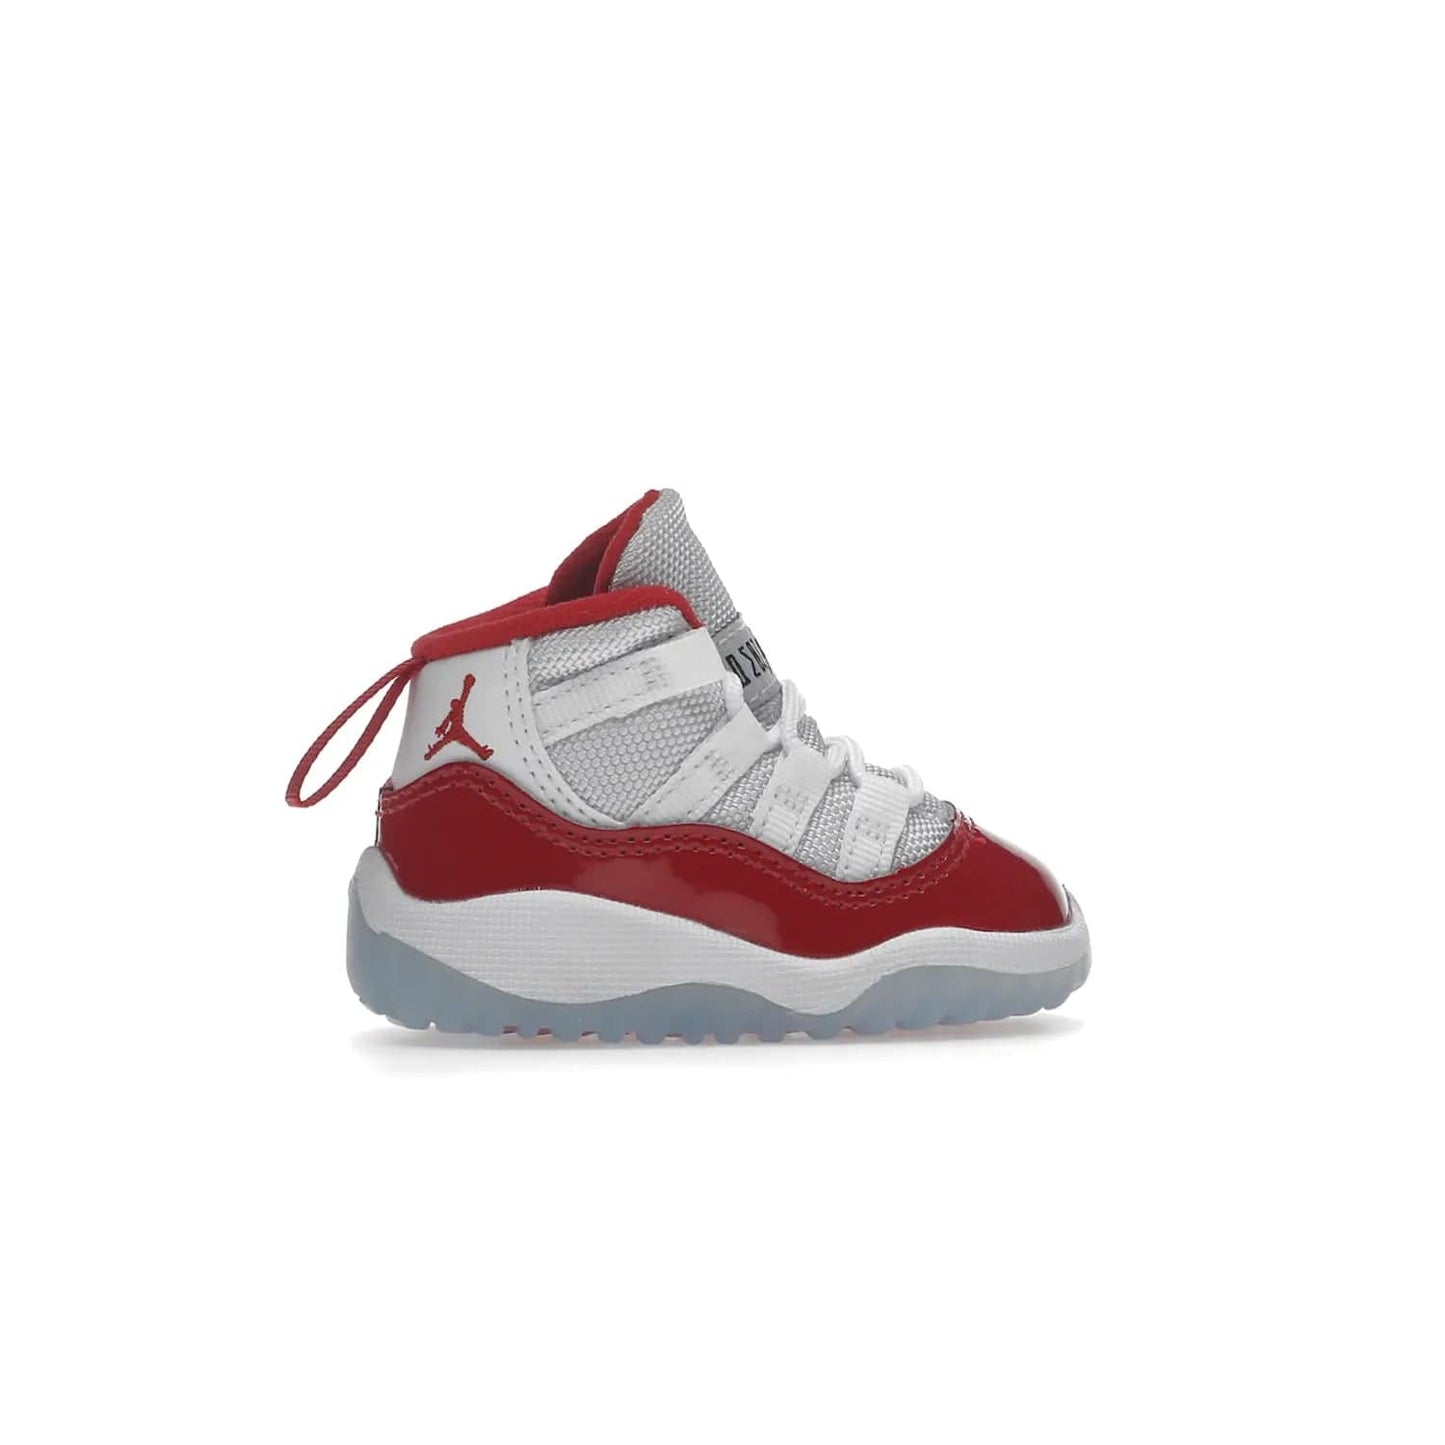 Jordan 11 Retro Cherry (2022) (TD) - Image 36 - Only at www.BallersClubKickz.com - Timeless classic. Air Jordan 11 Retro Cherry 2022 TD combines mesh, leather & suede for a unique look. White upper with varsity red suede. Jumpman logo on collar & tongue. Available Dec 10th, priced at $80.